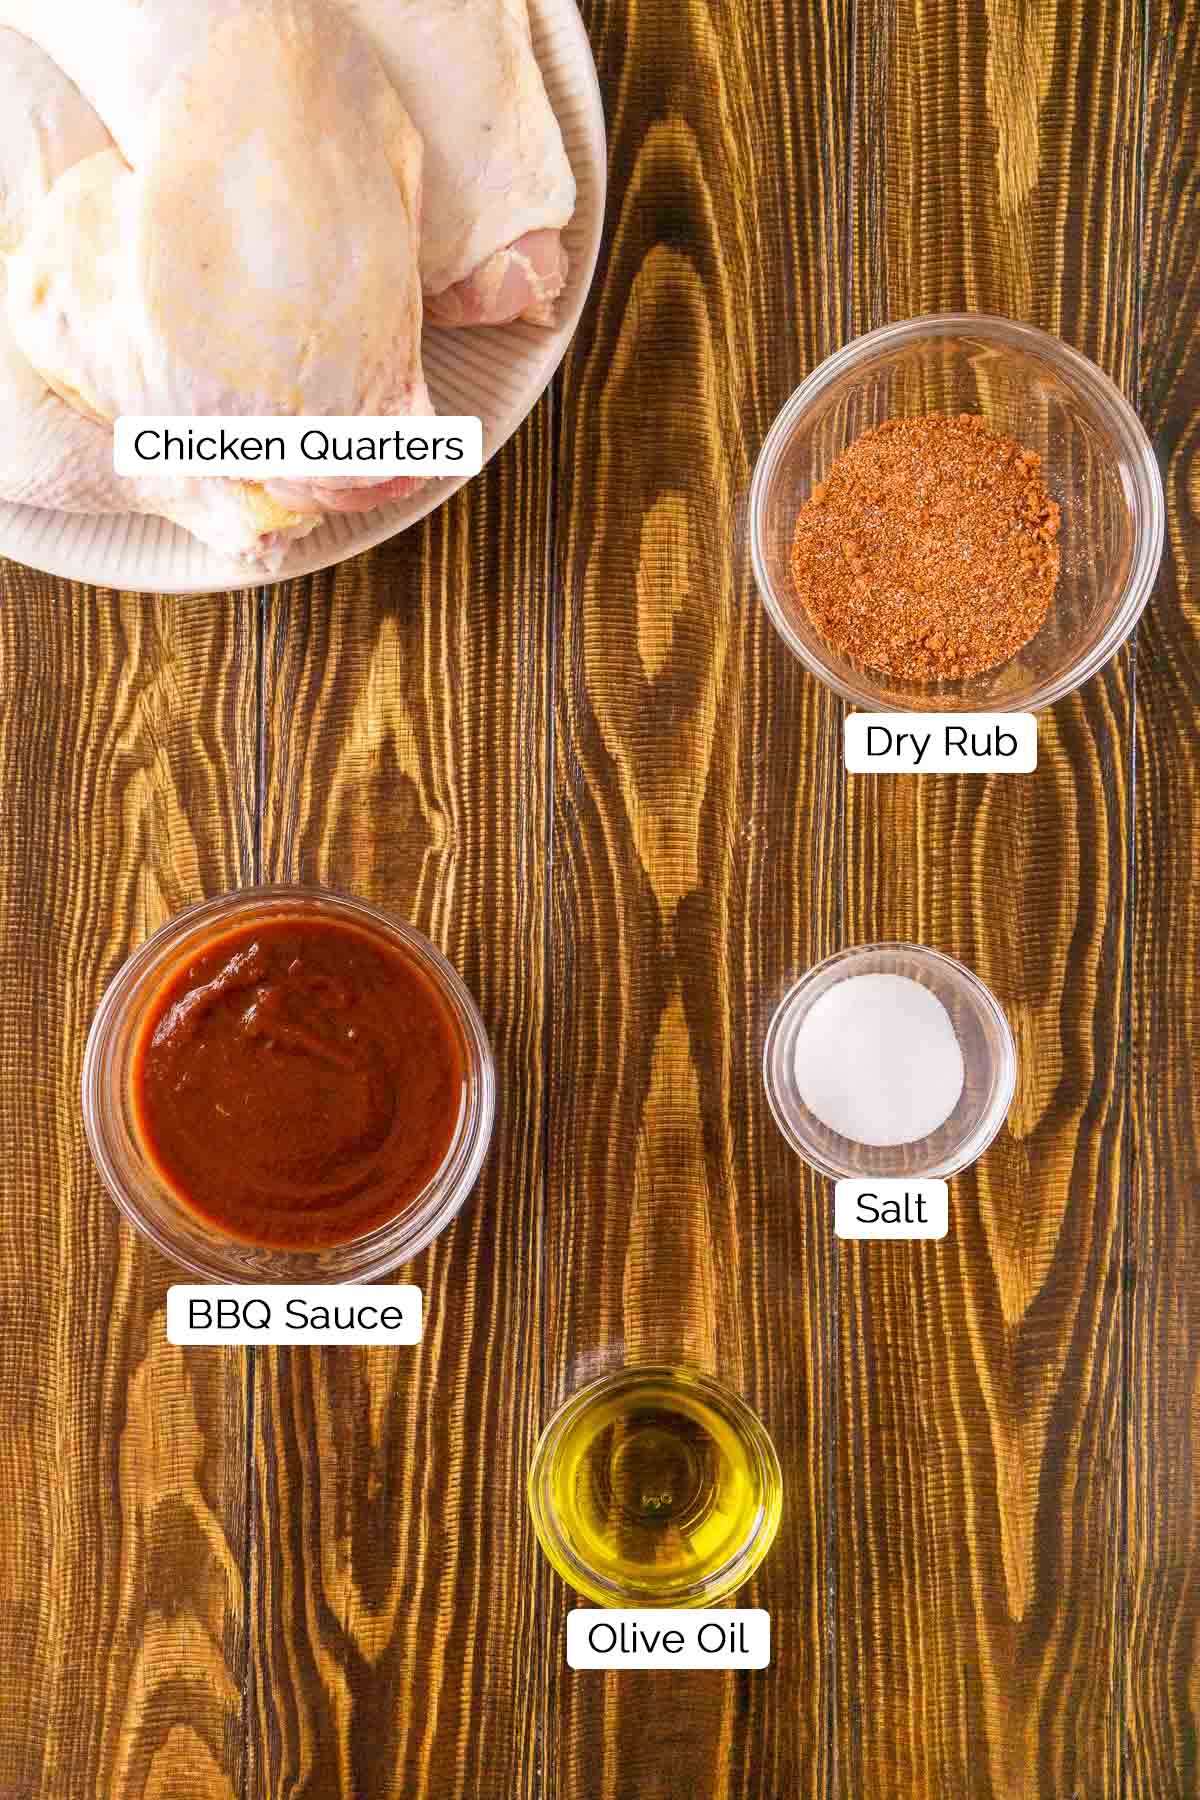 The ingredients for smoking the chicken on a brown wooden board with white and black labels underneath the items.